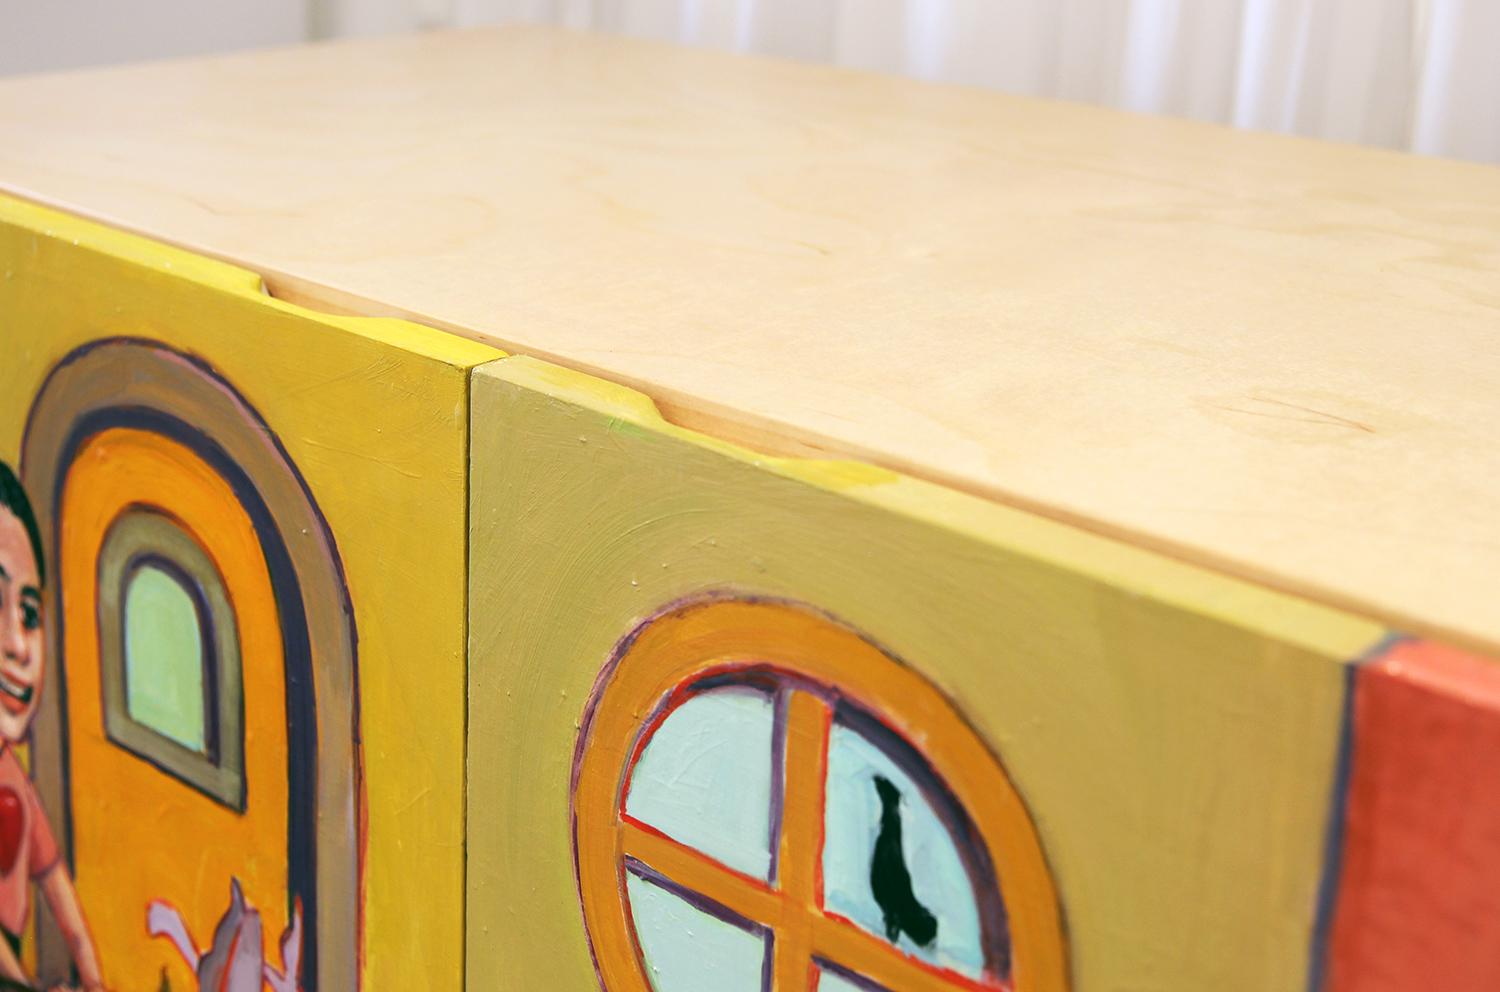 Stunning custom contemporary modern sideboard with colorful abstract figurative painting. This handmade sideboard was custom made in Houston, Texas in collaboration with surrealist painter Henry David Potwin. The hand painted door fronts feature